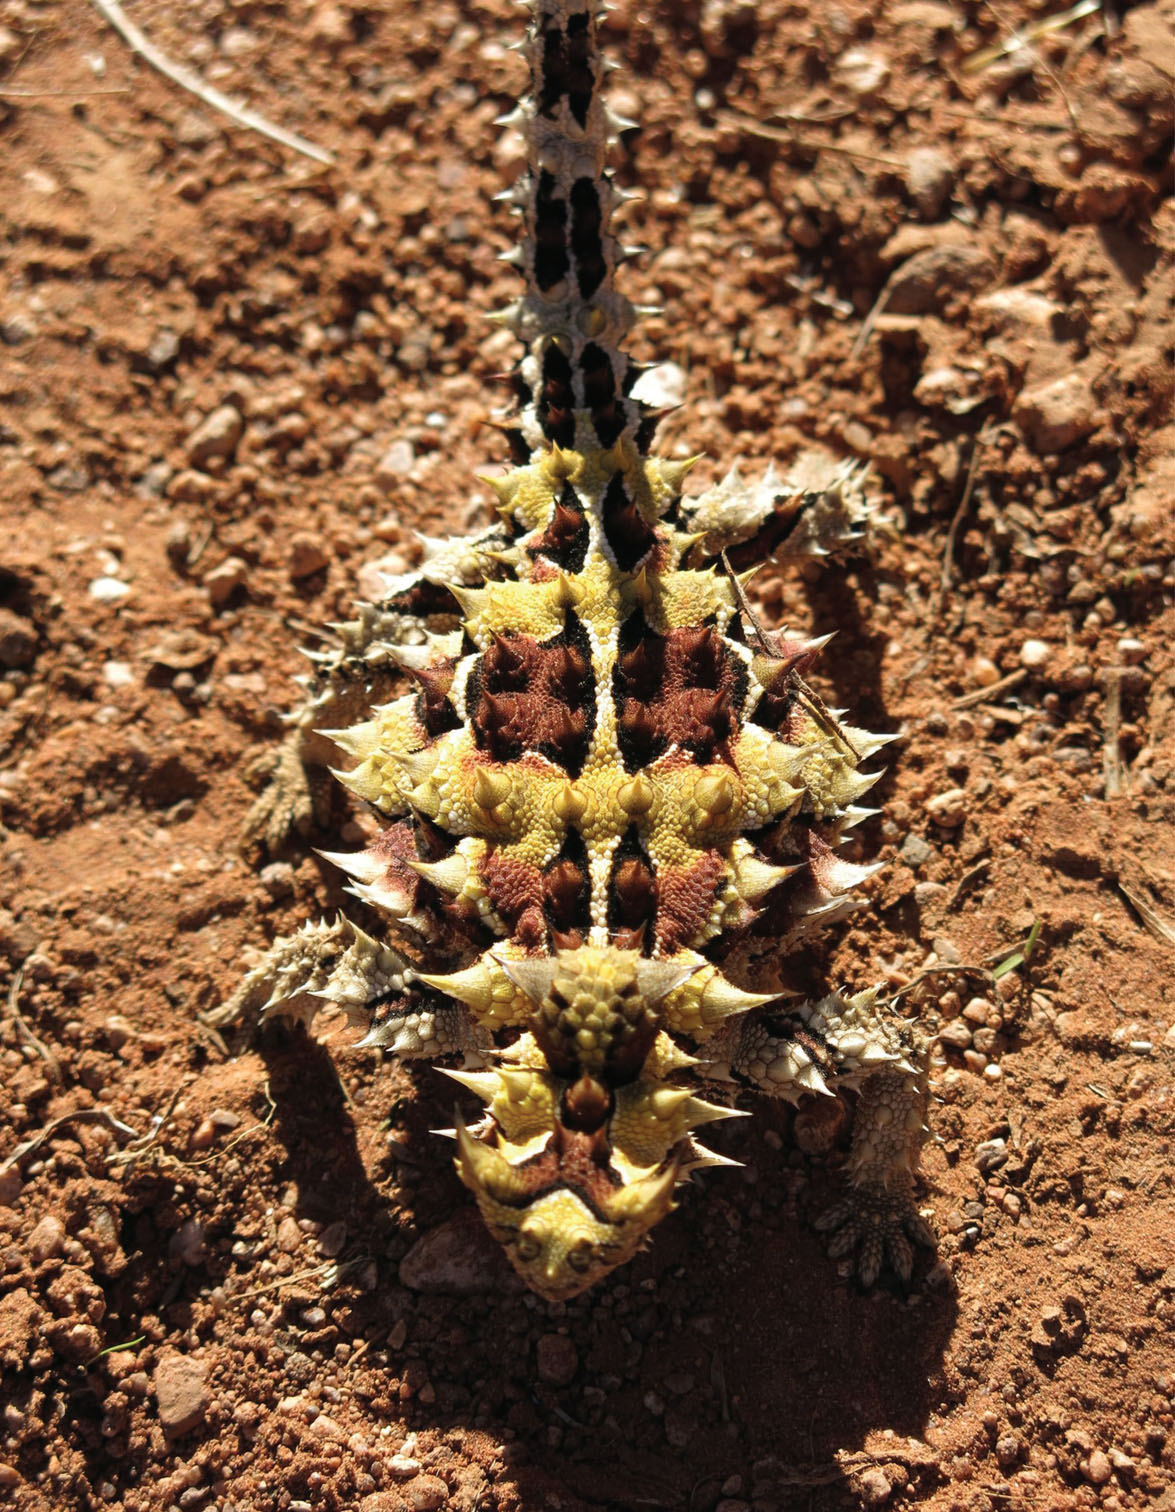 100. The skin of the thorny devil has a network of capillary grooves that transfer water to the lizard’s mouth from damp ground or from droplets of water that condense onto spines